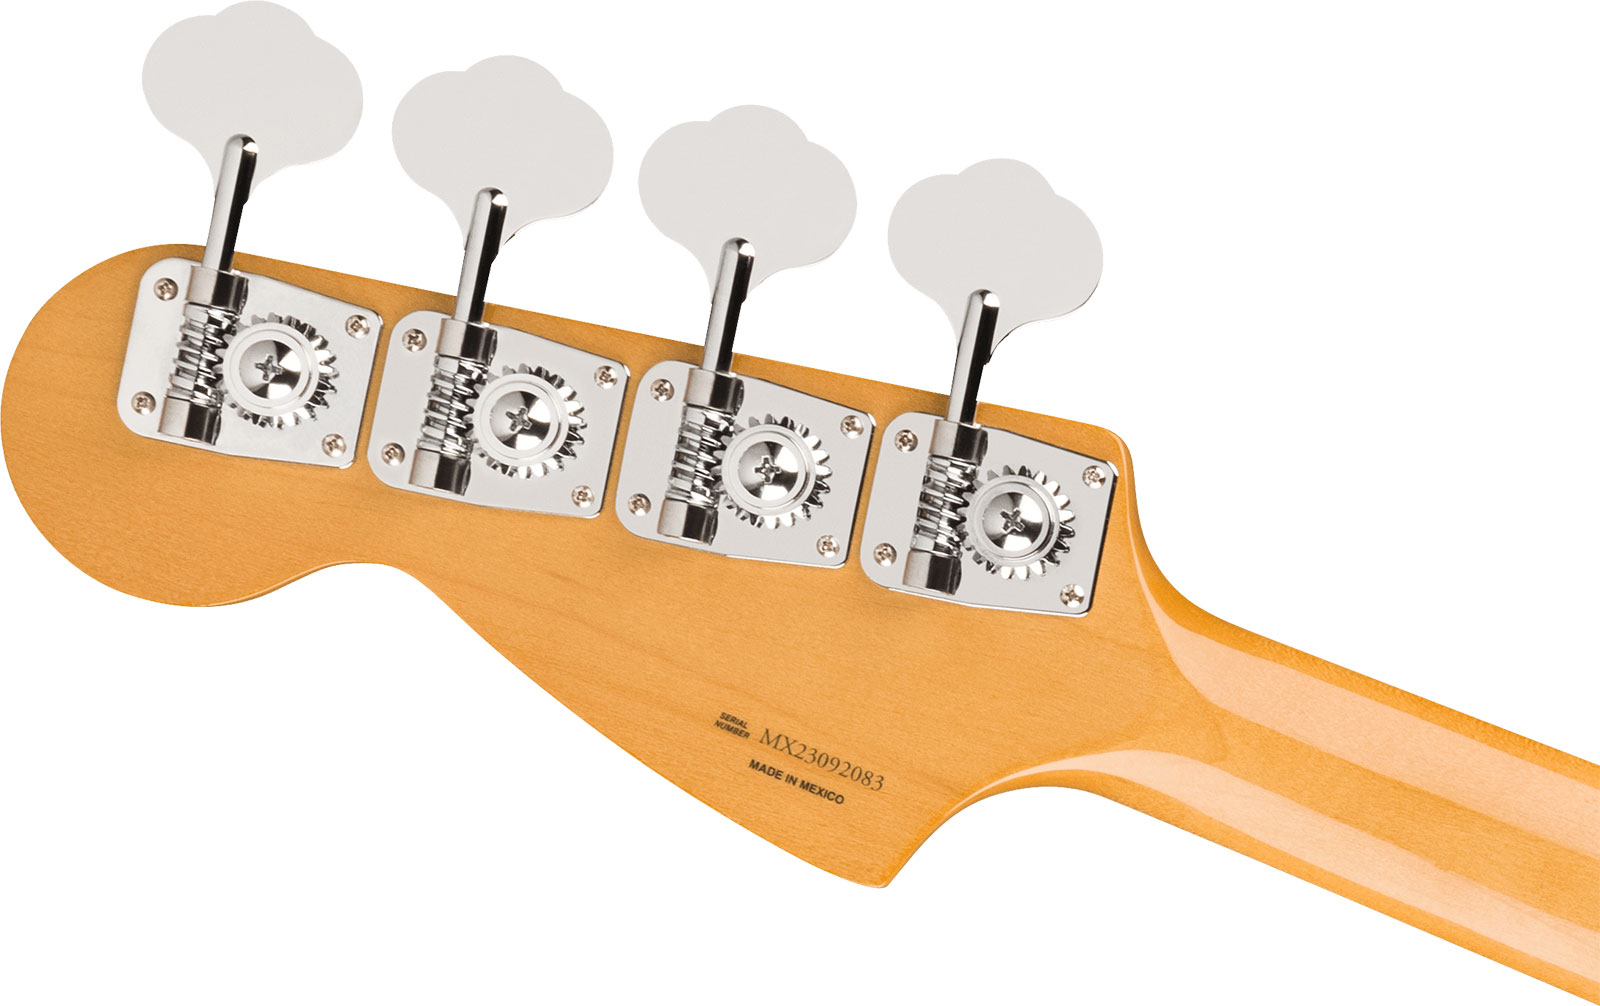 Fender Mustang Bass 70s Competition Vintera 2 Rw - Competition Orange - Solidbody E-bass - Variation 3